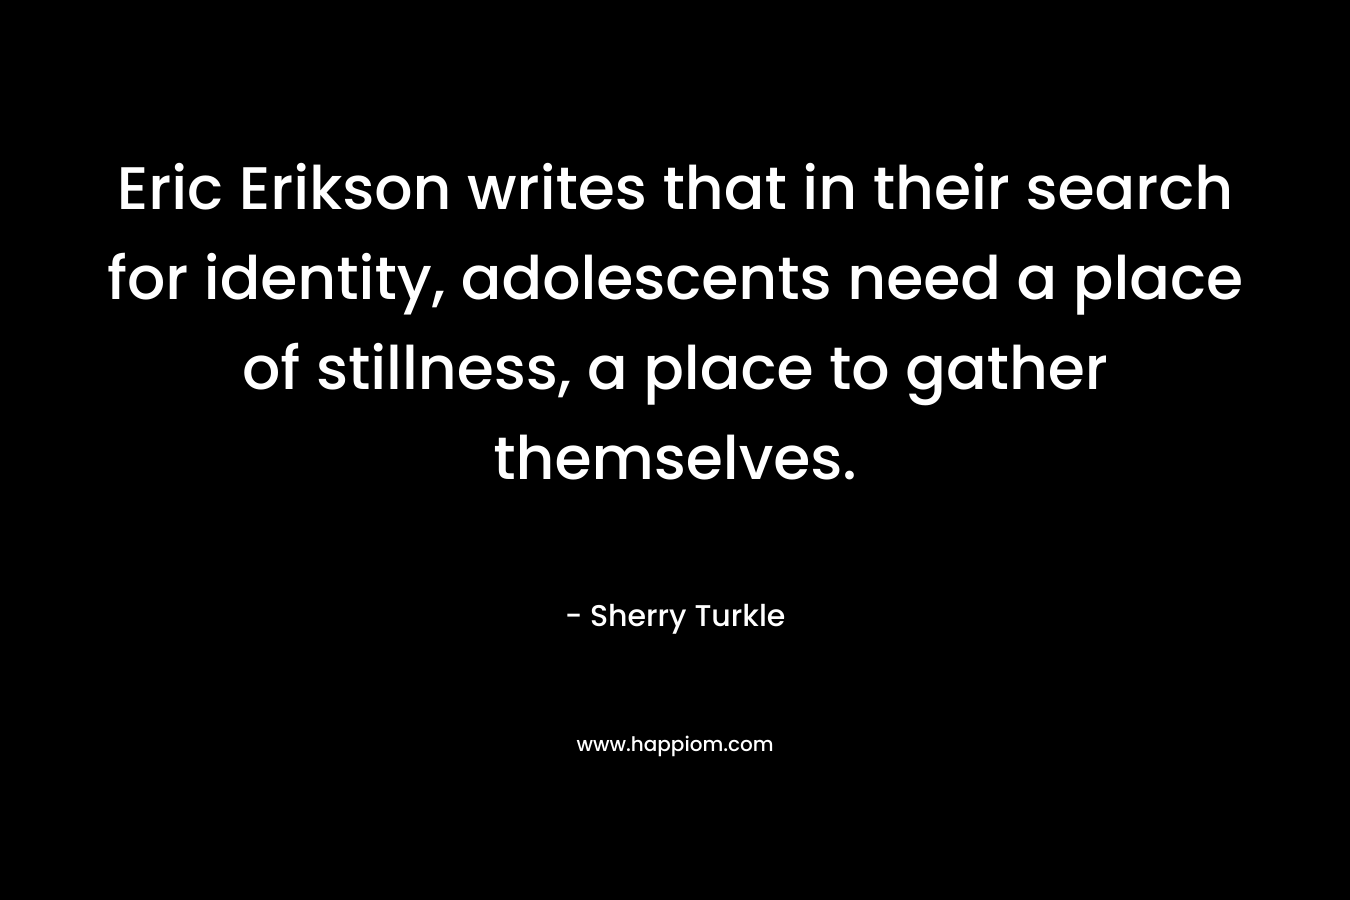 Eric Erikson writes that in their search for identity, adolescents need a place of stillness, a place to gather themselves.